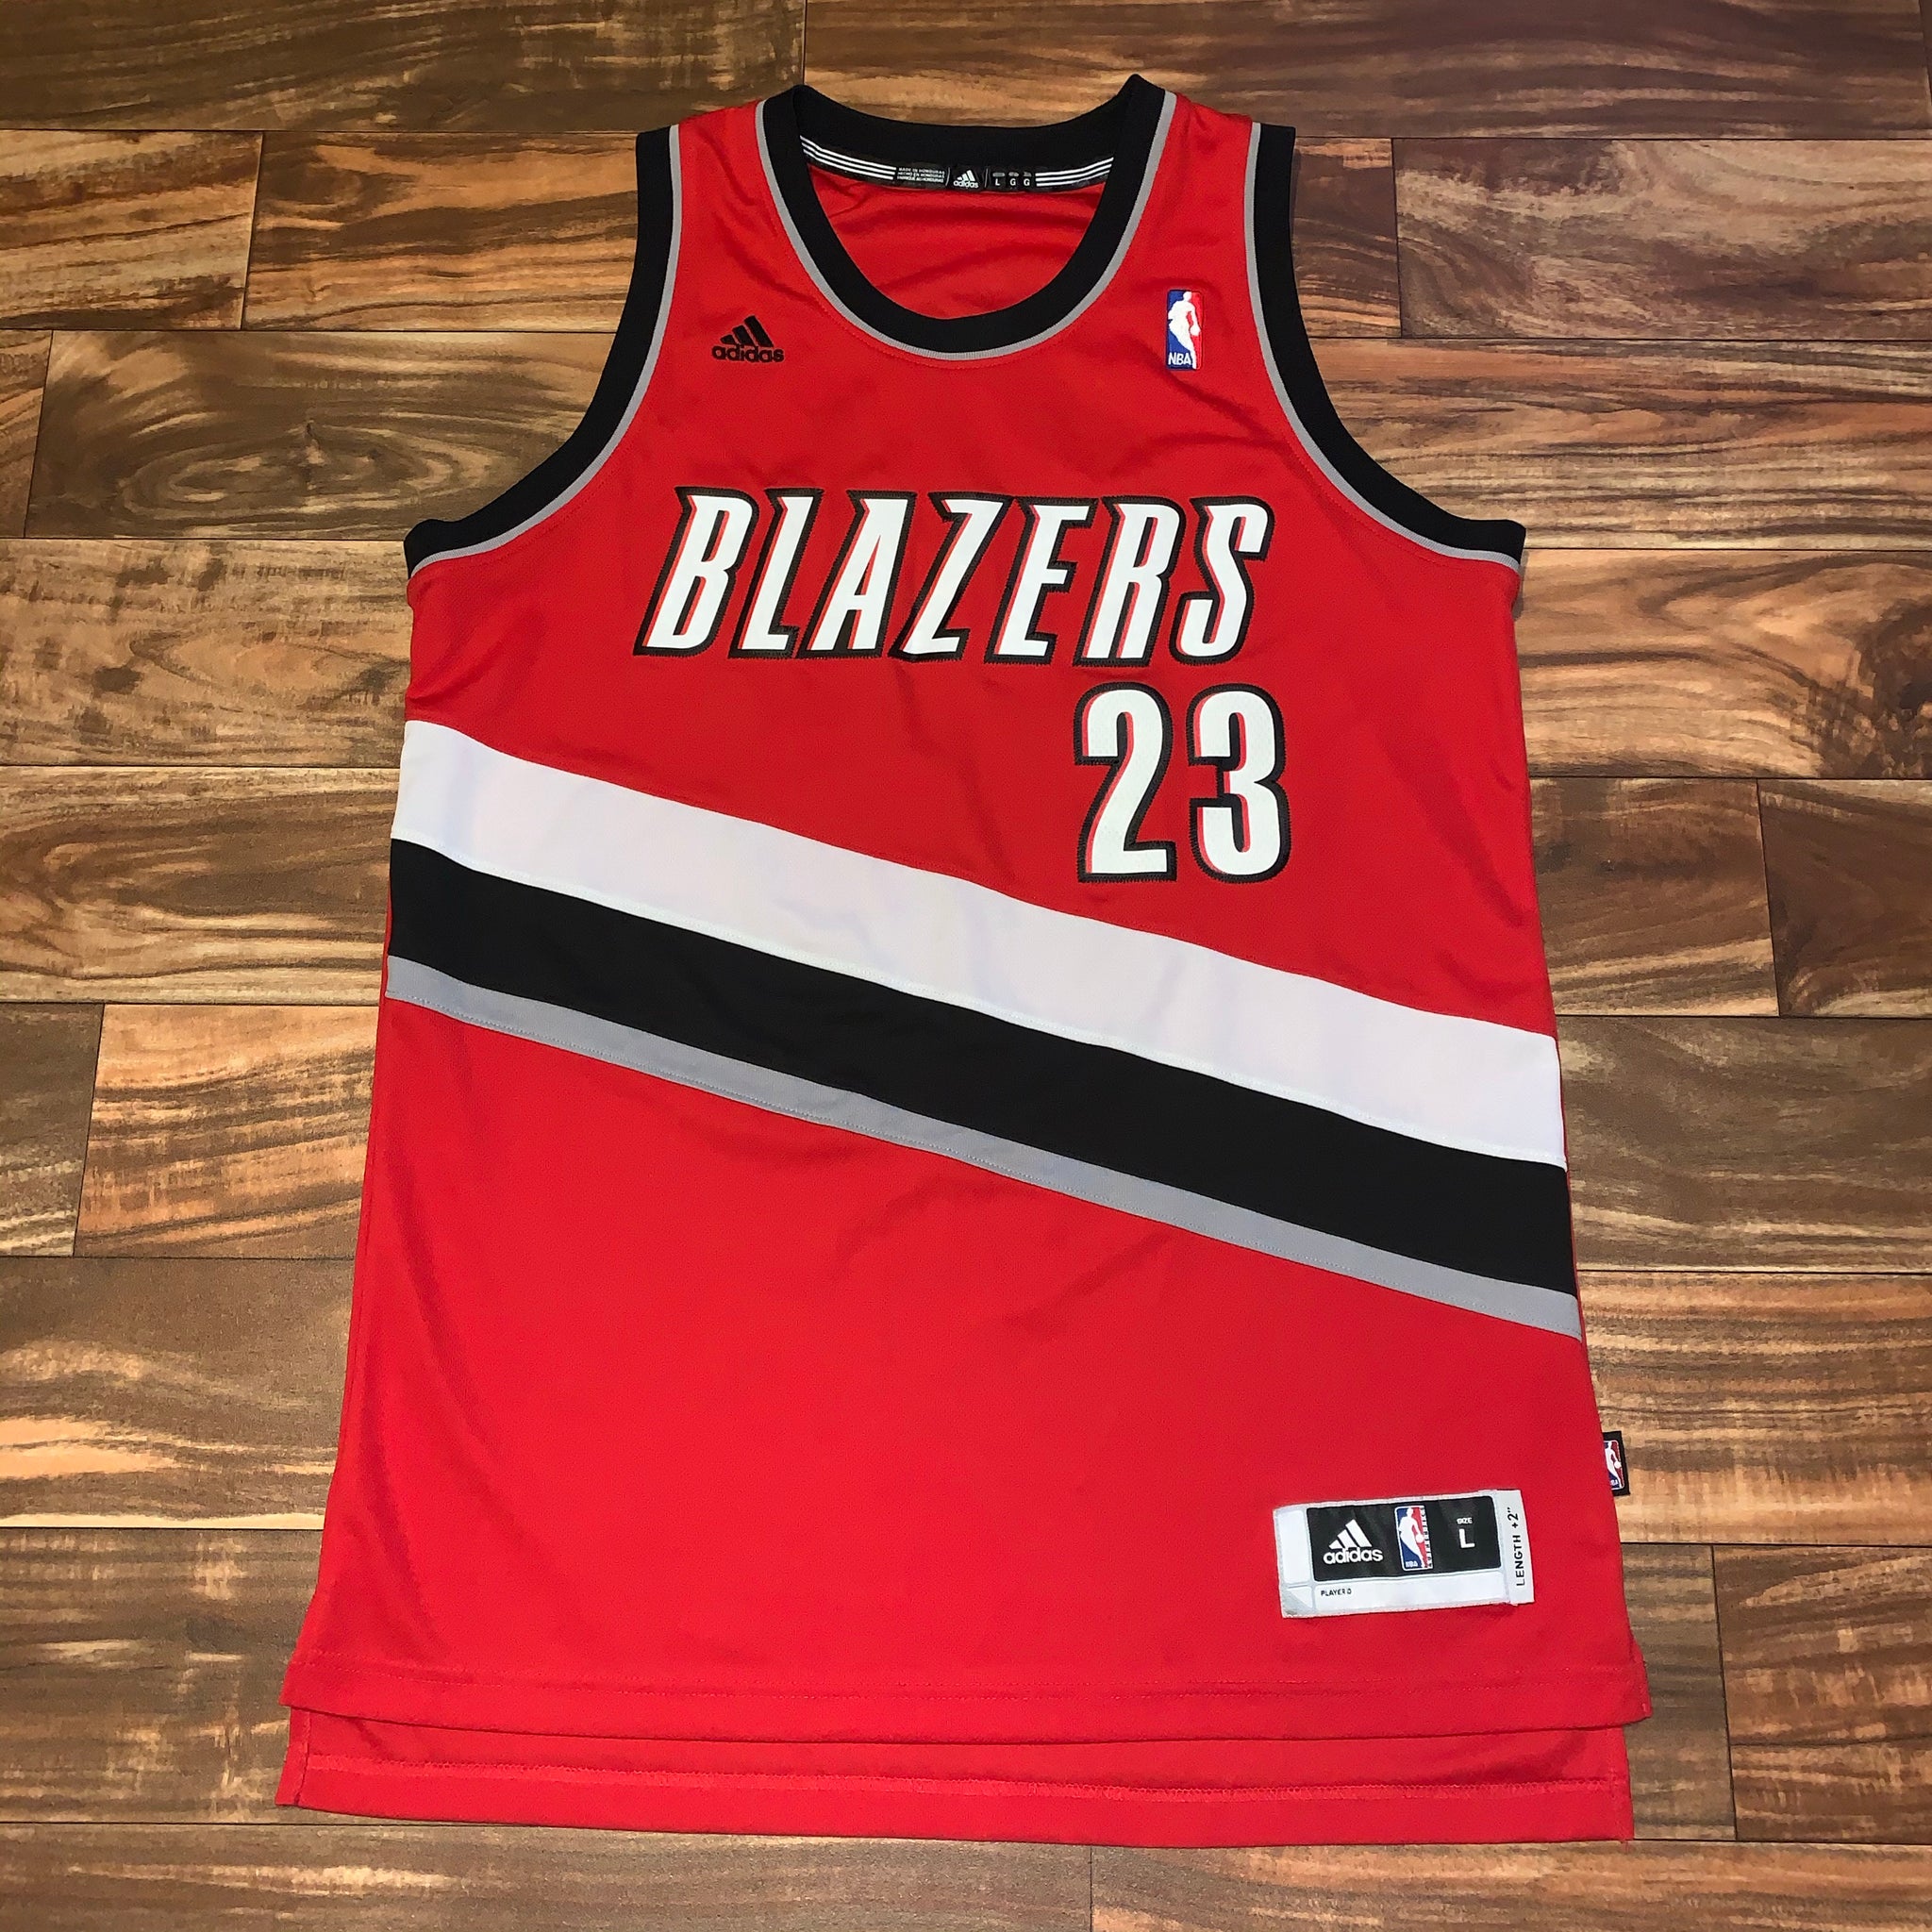 marcus camby jersey